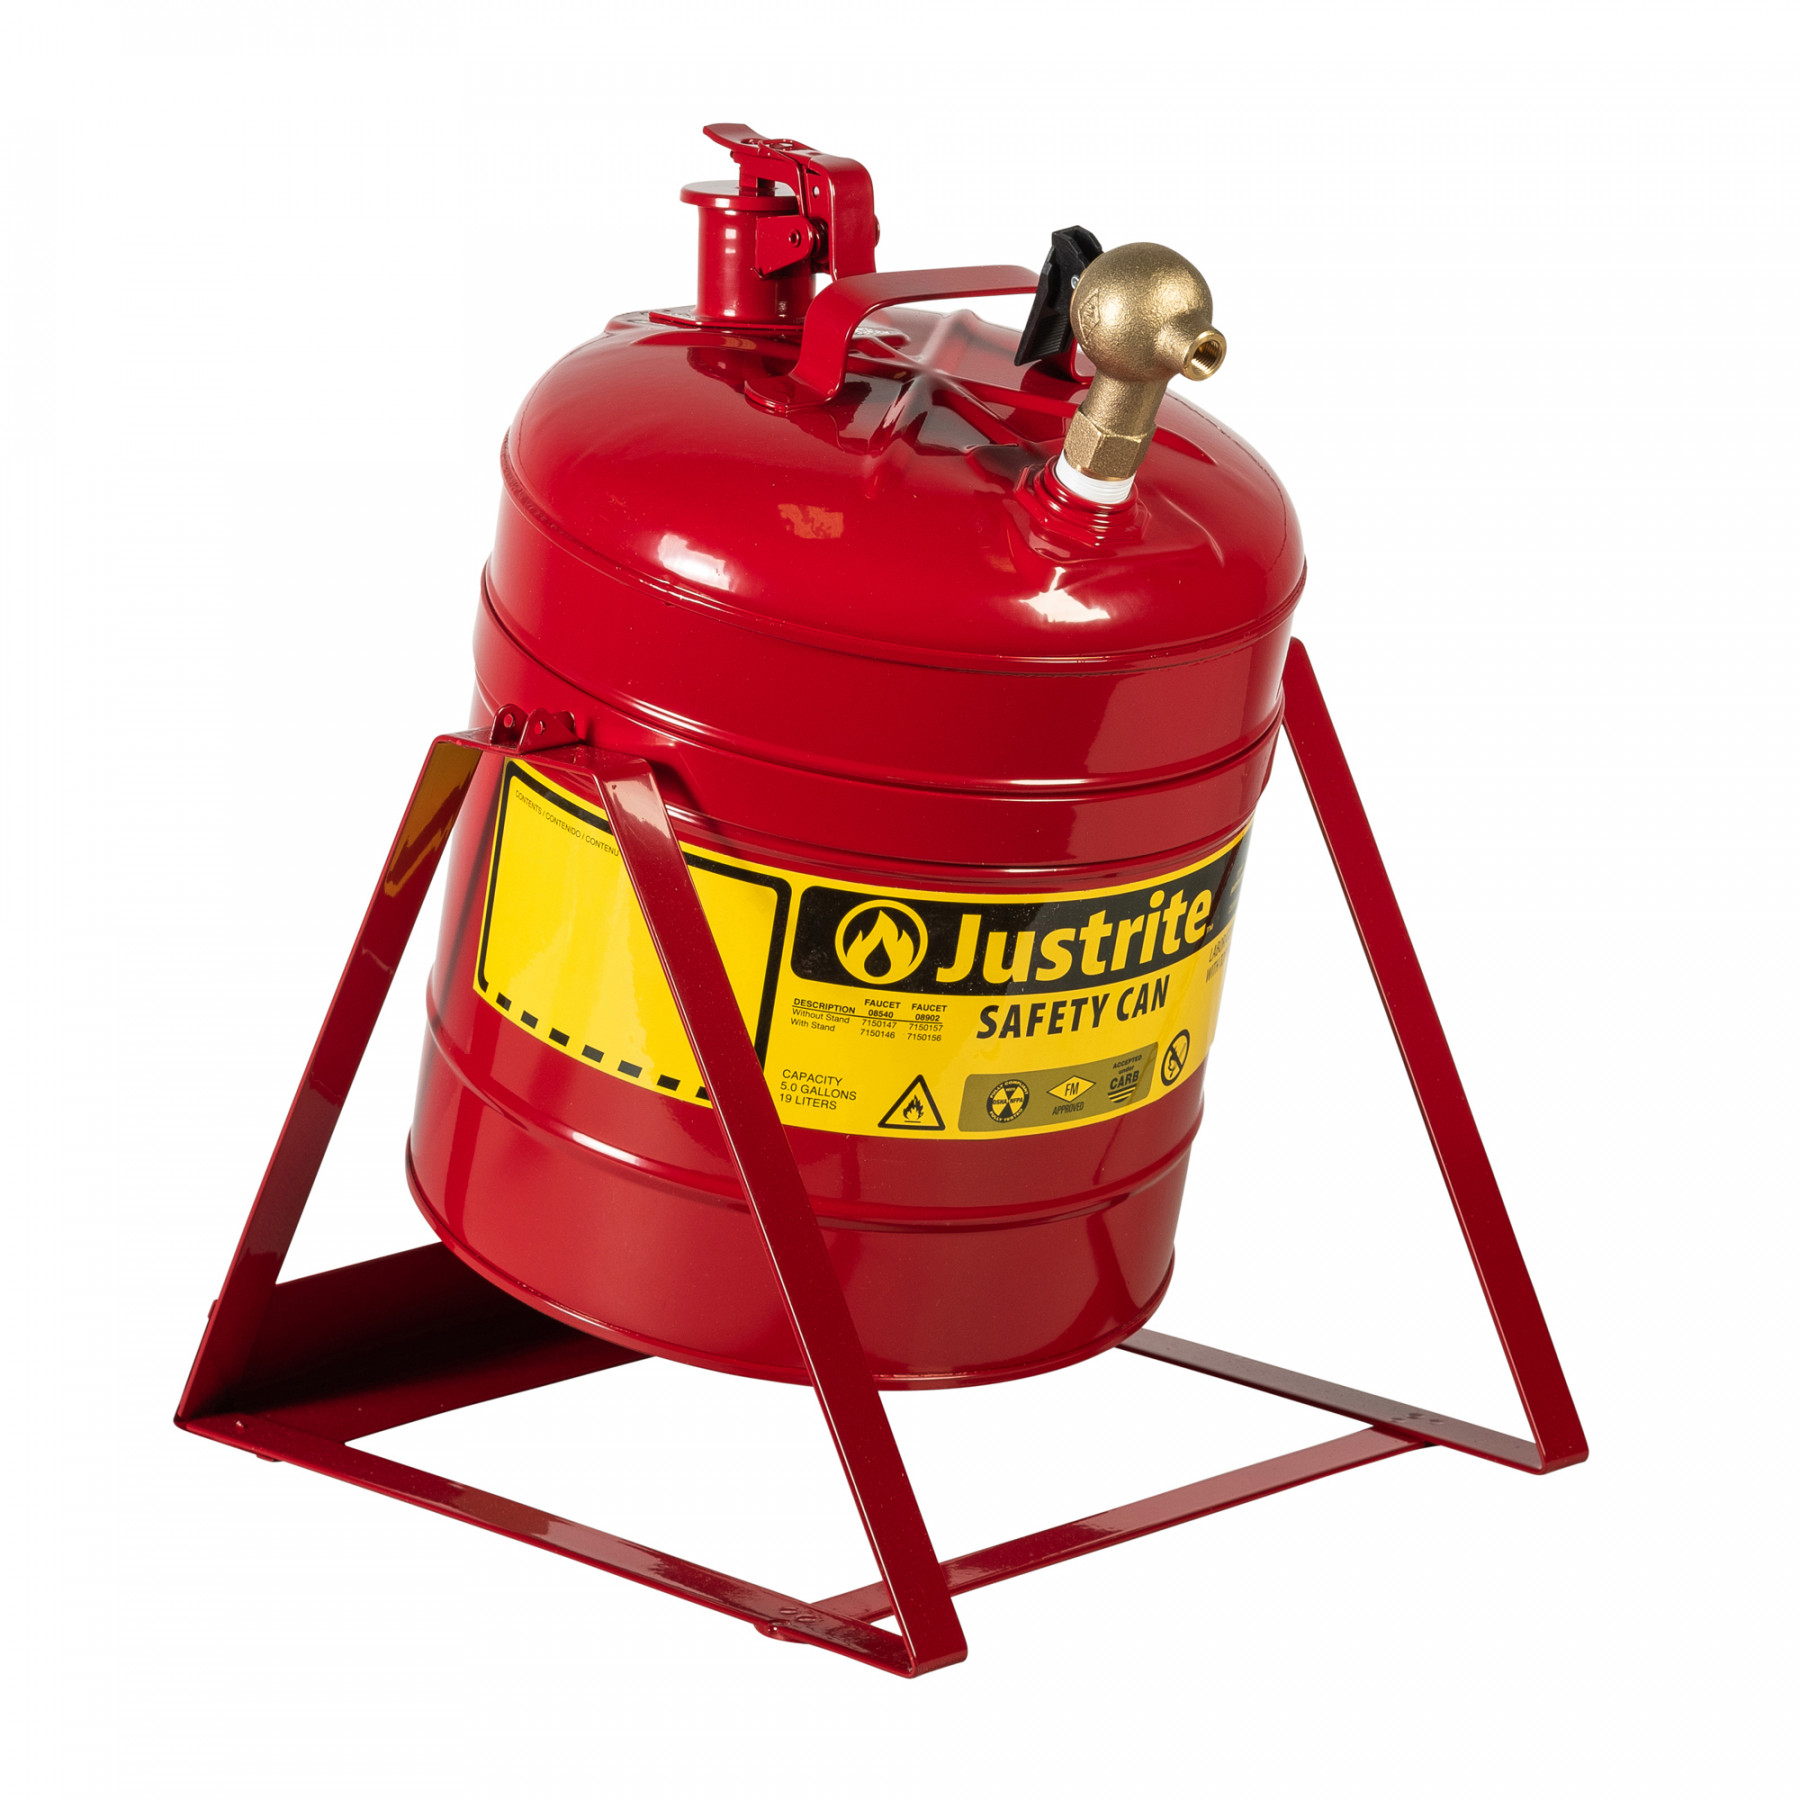 7150146_type-1-safety-can-5_gallon-red-with-tilt_stand_justrite